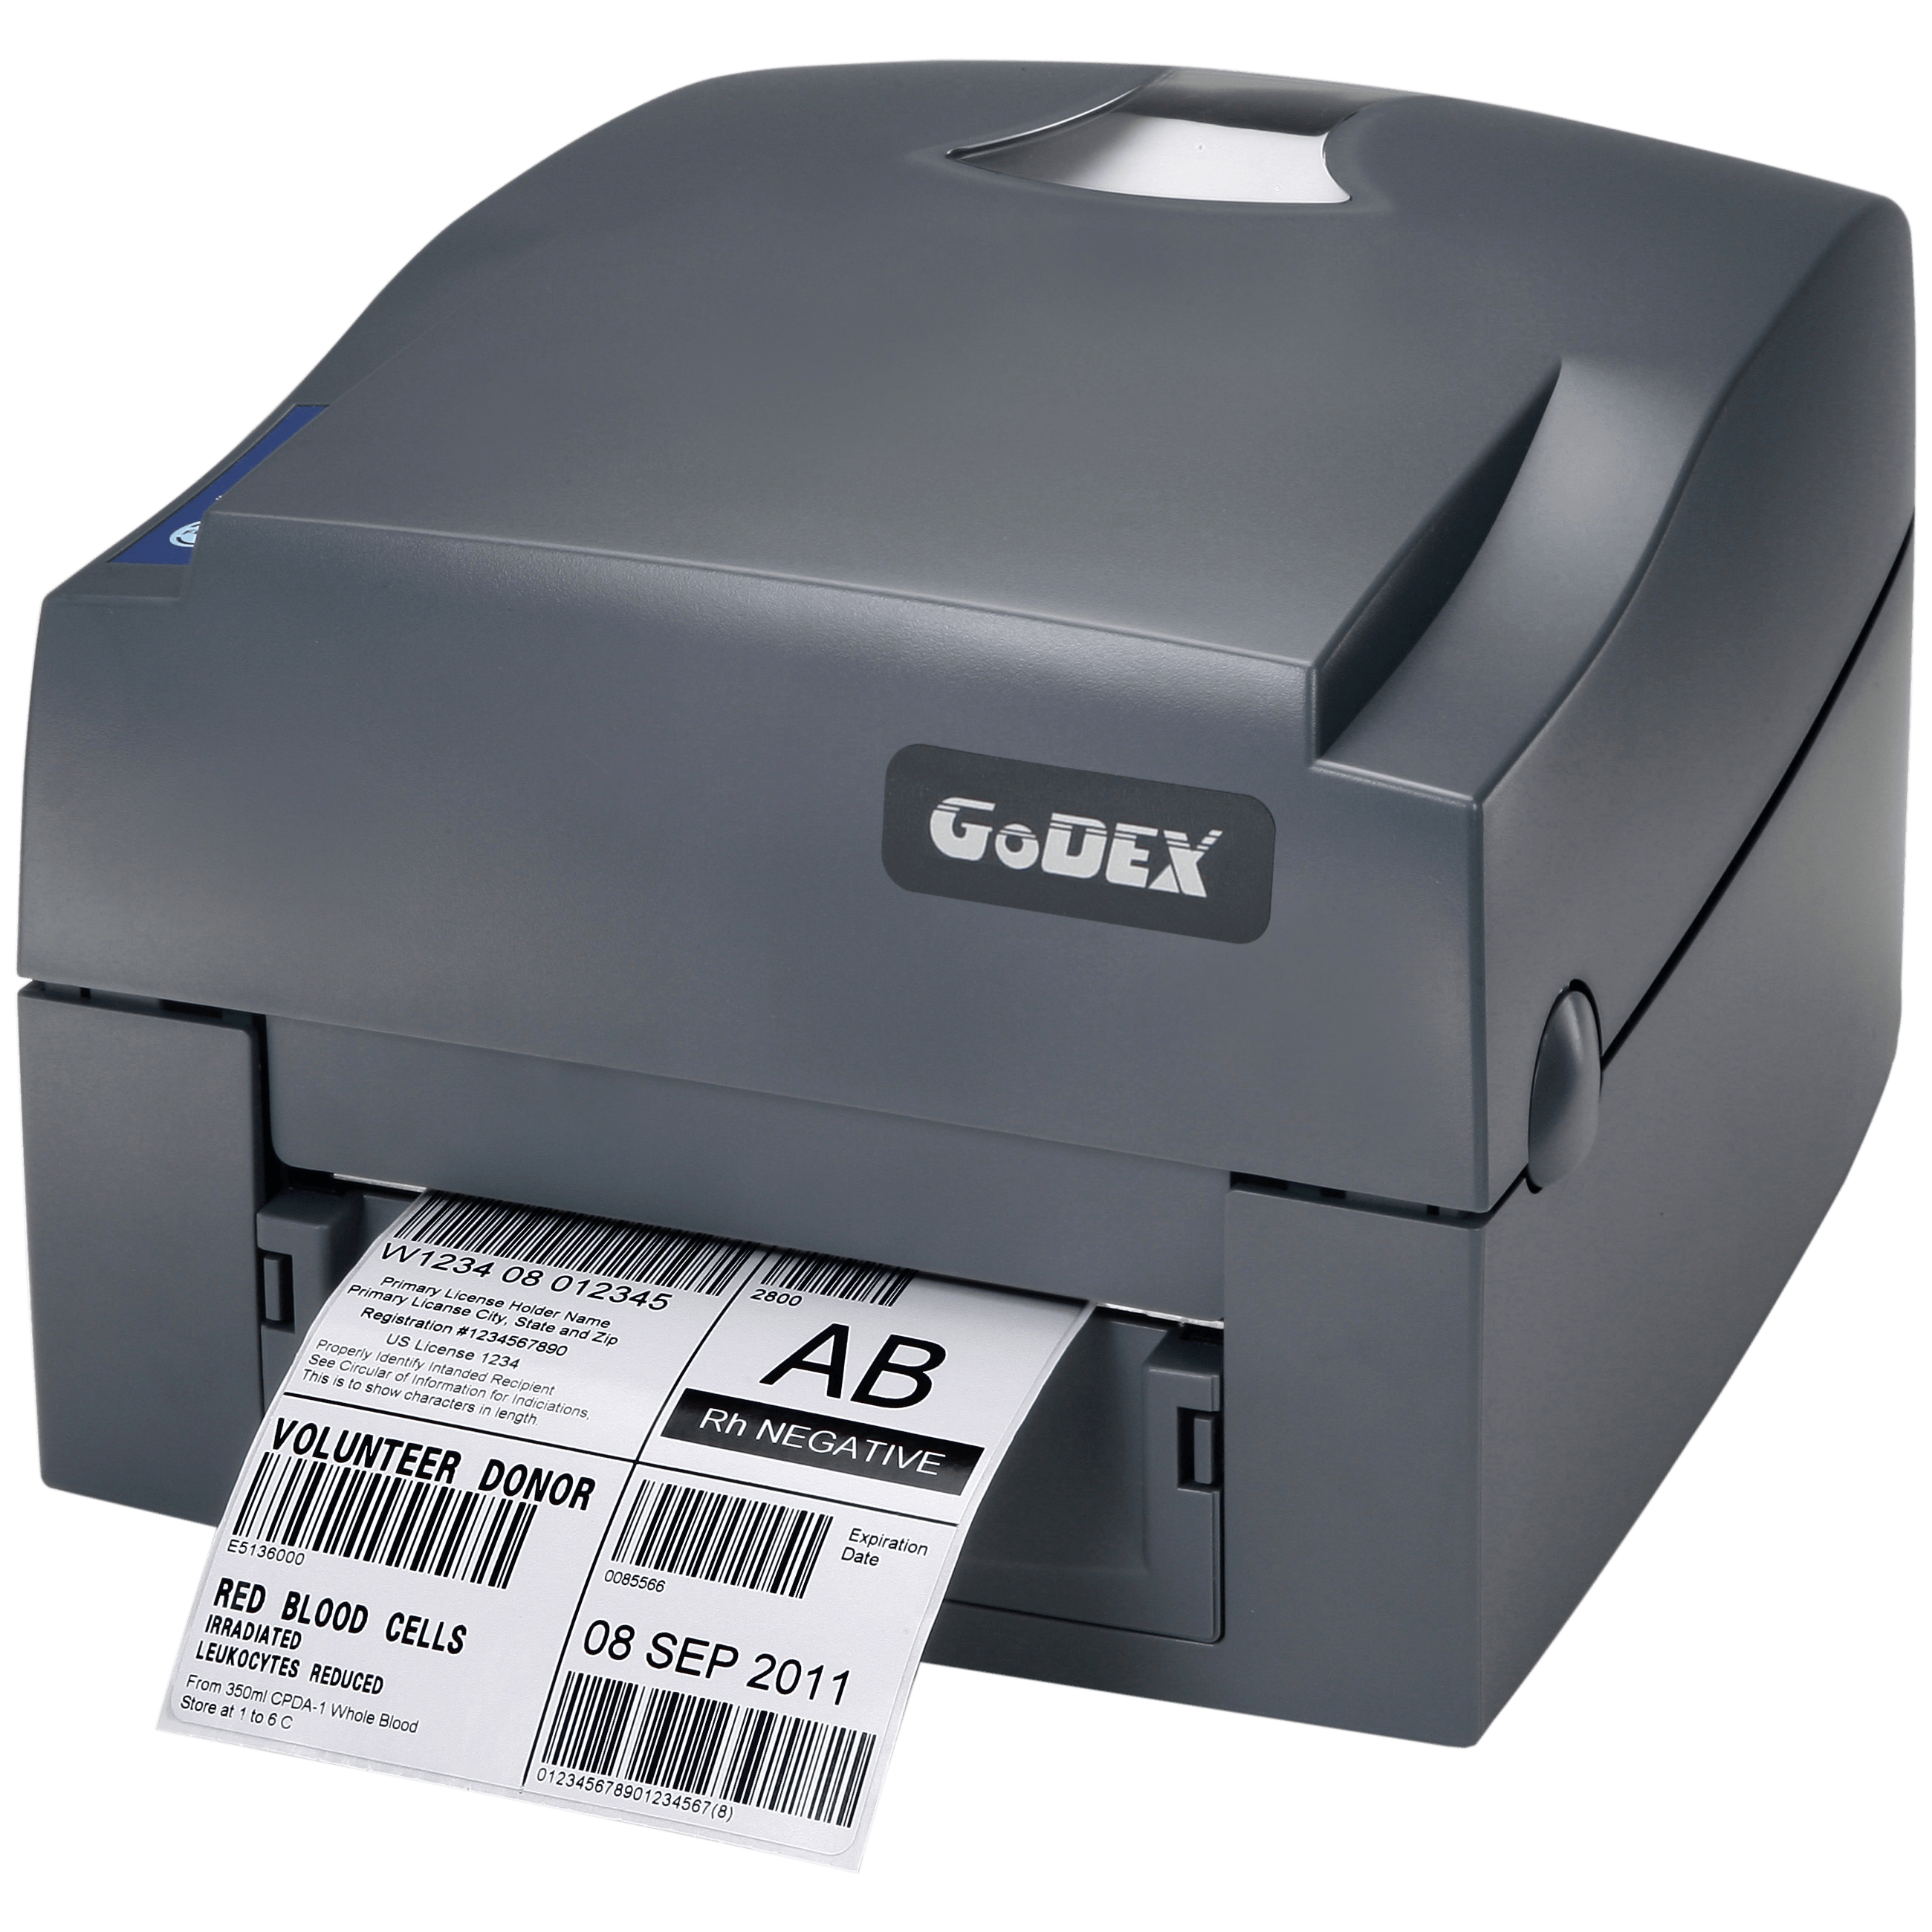 Featured image for “Godex G530”